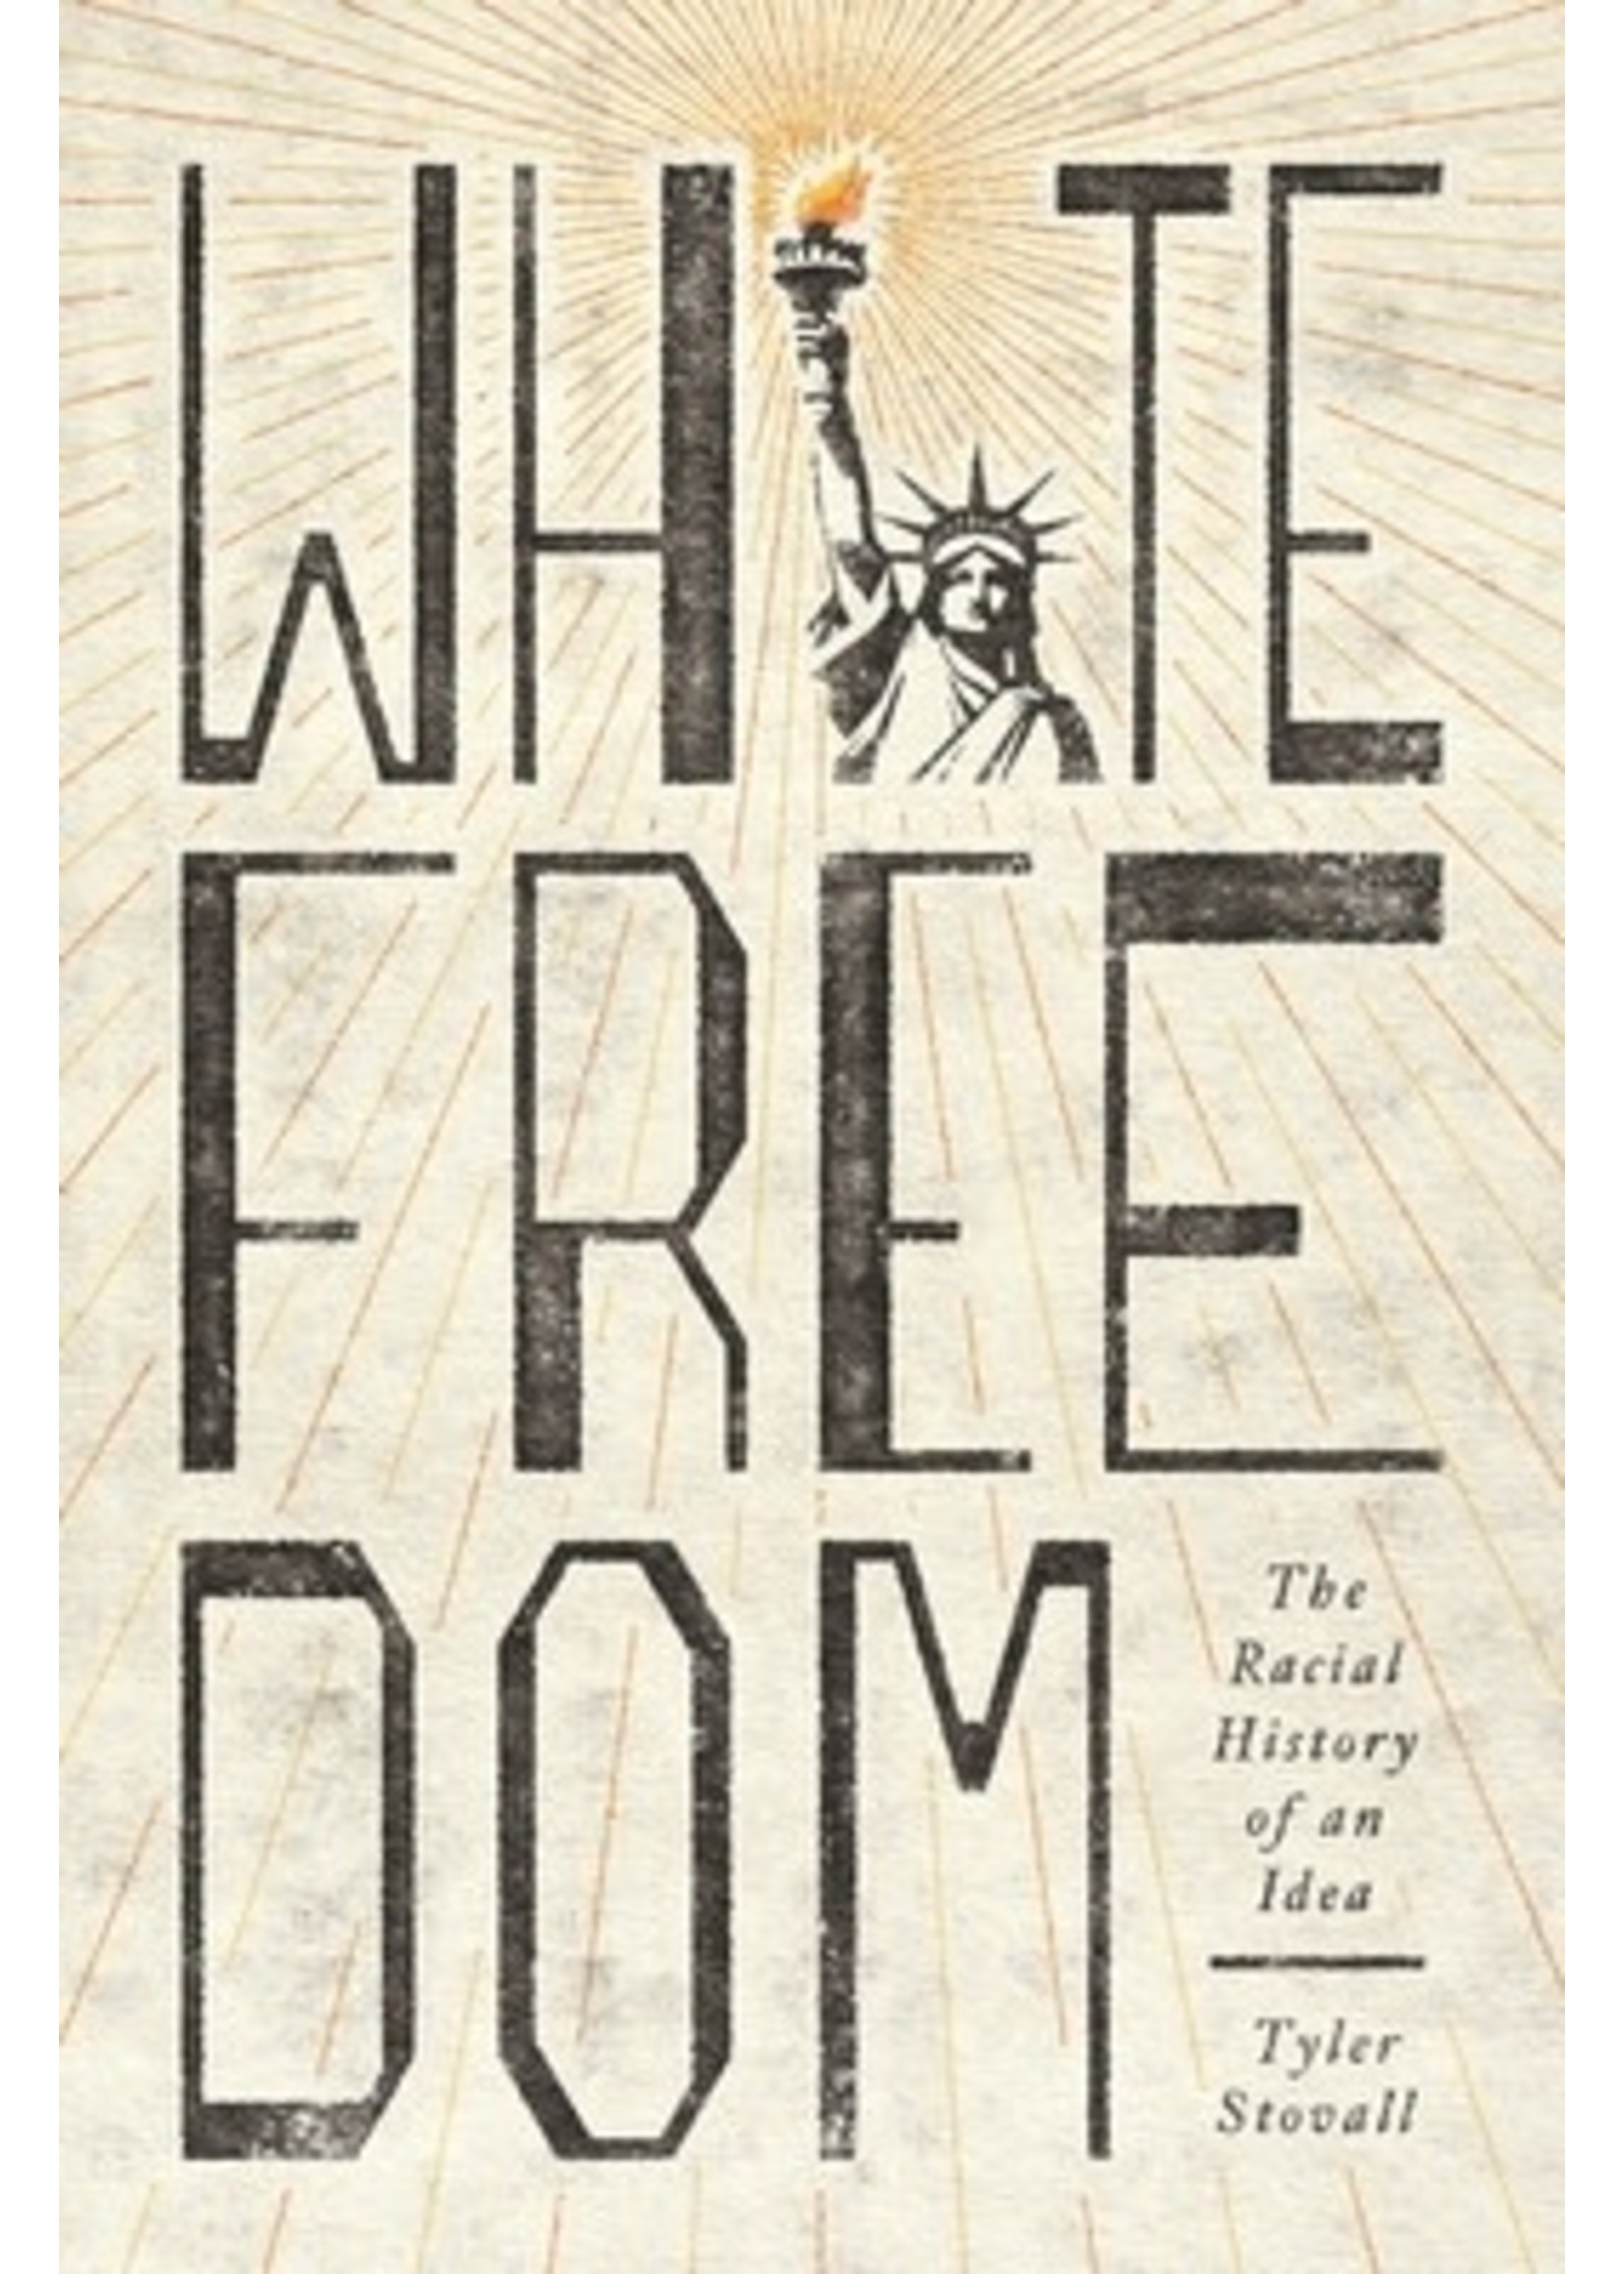 White Freedom: The Racial History of an Idea by Tyler Stovall